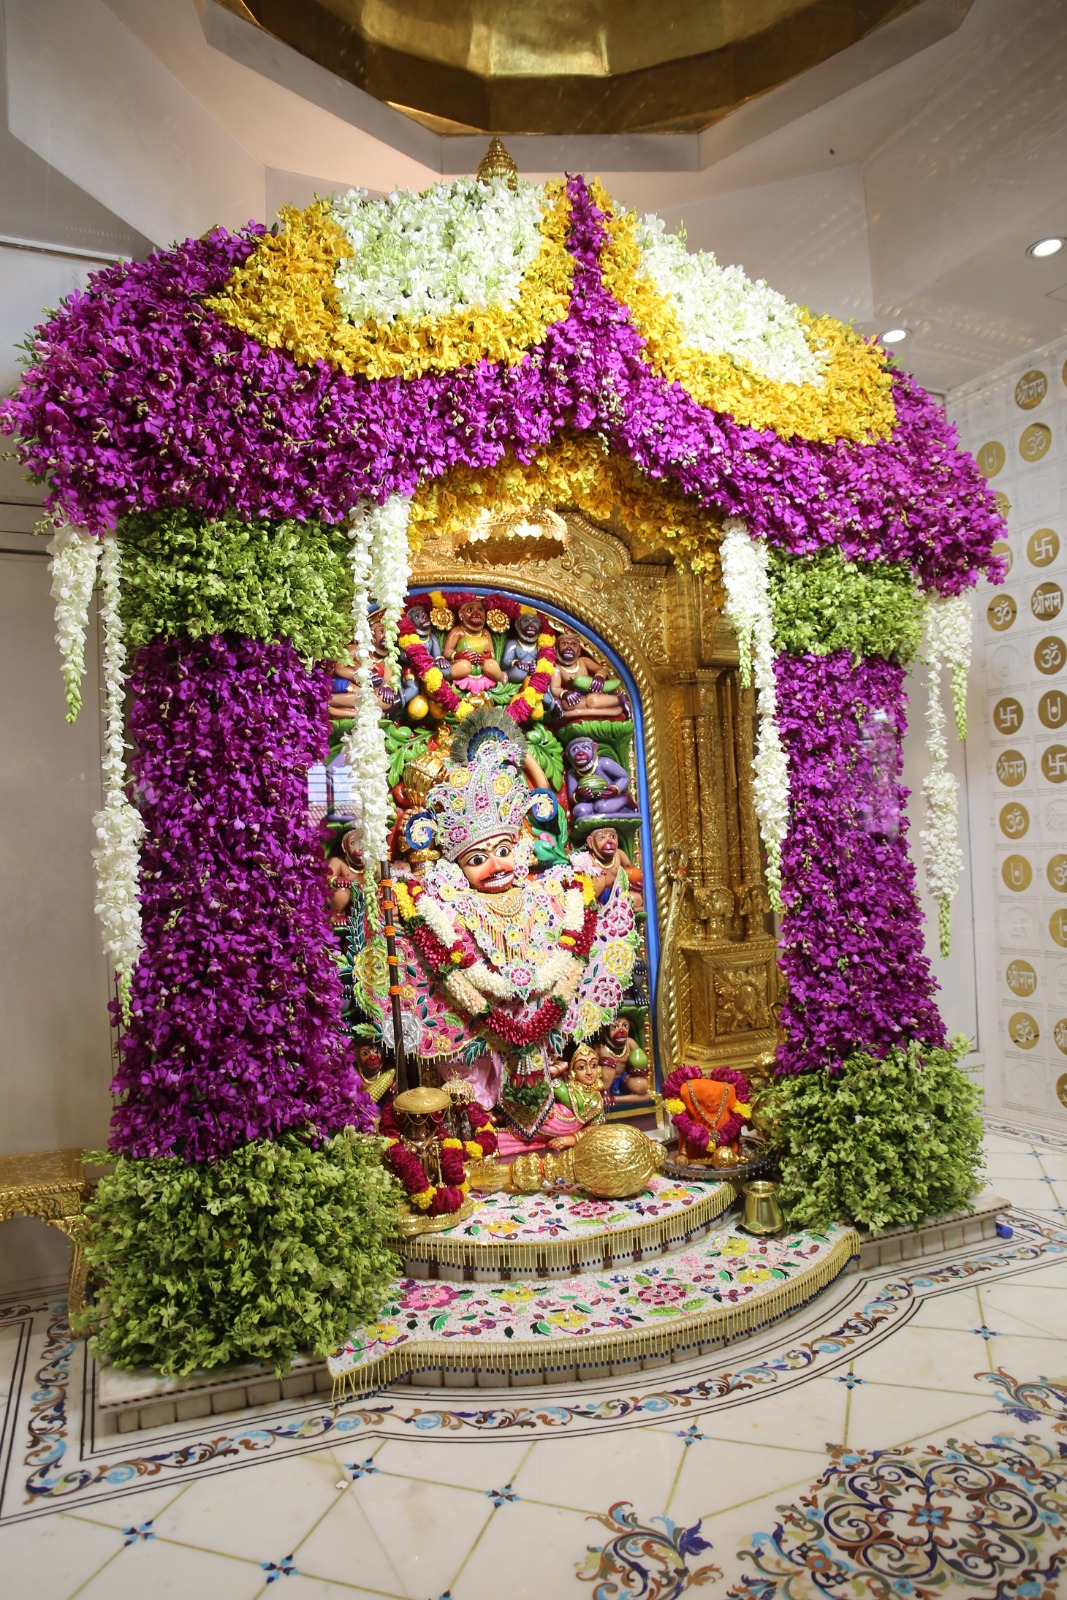 Srikashtabhanjan Dev Hanuman was decorated with 60 kg of colorful orchid flowers.